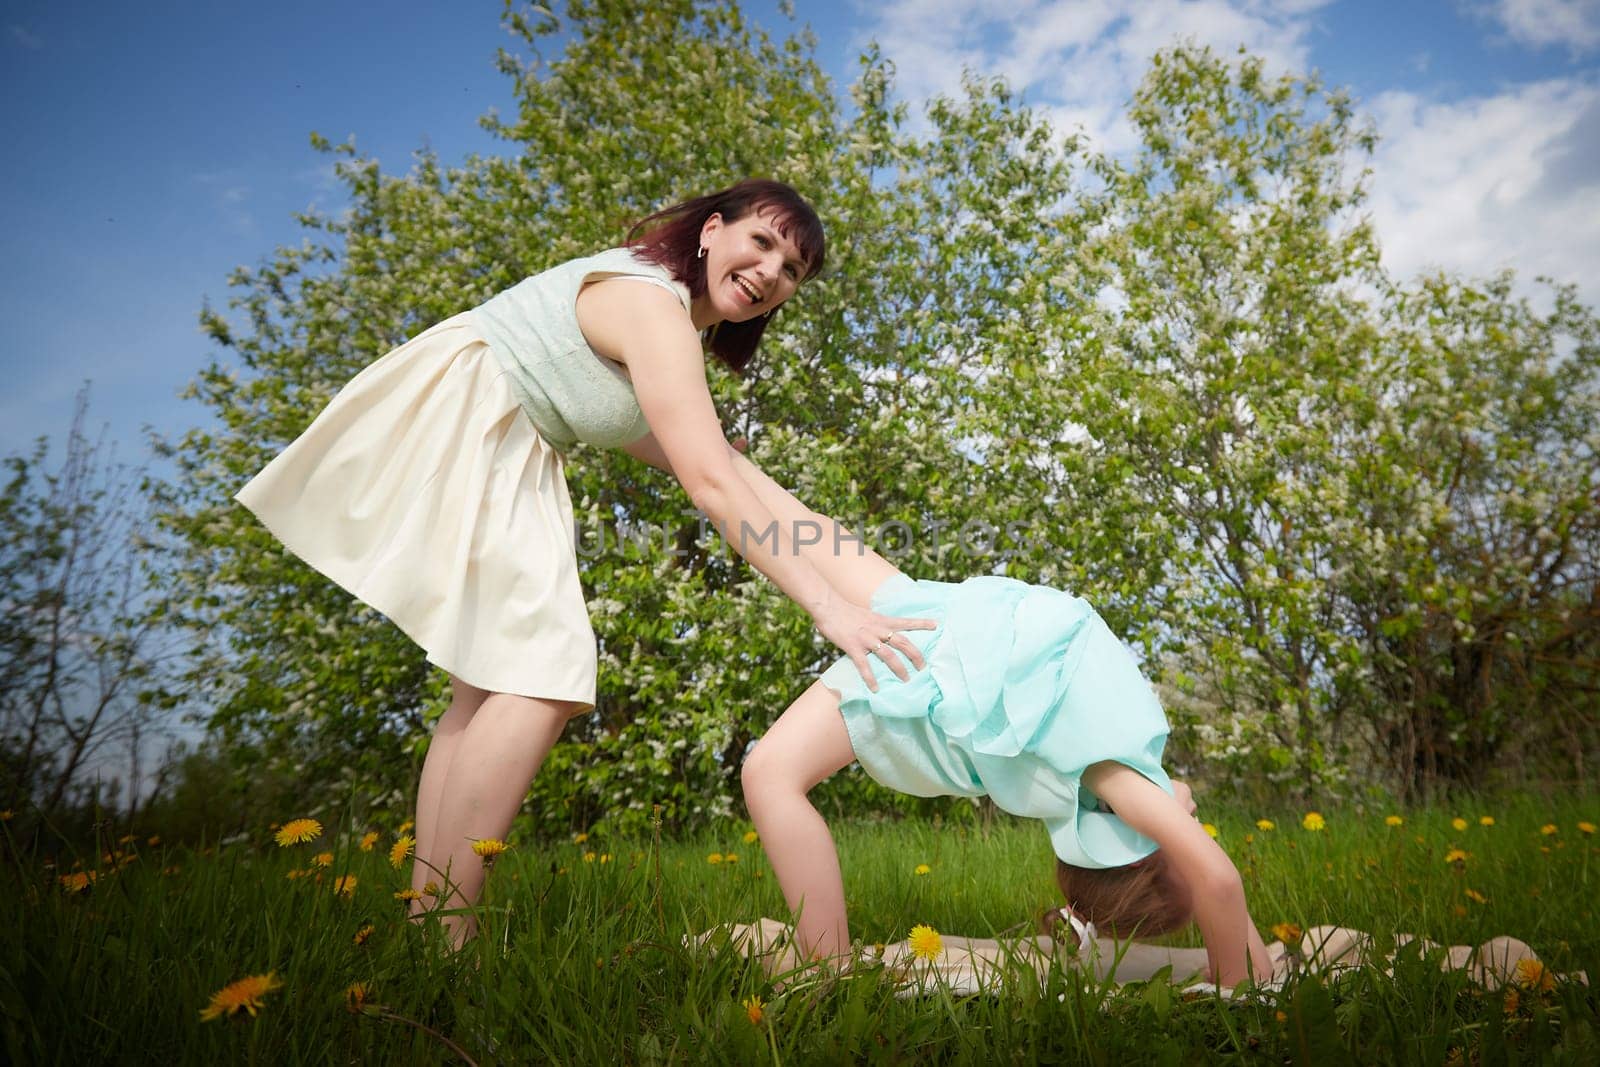 Happy mother and daughter enjoying rest, playing, fun and doing sports exercises on nature in a green field. Woman and girl resting outdoors in summer and spring day